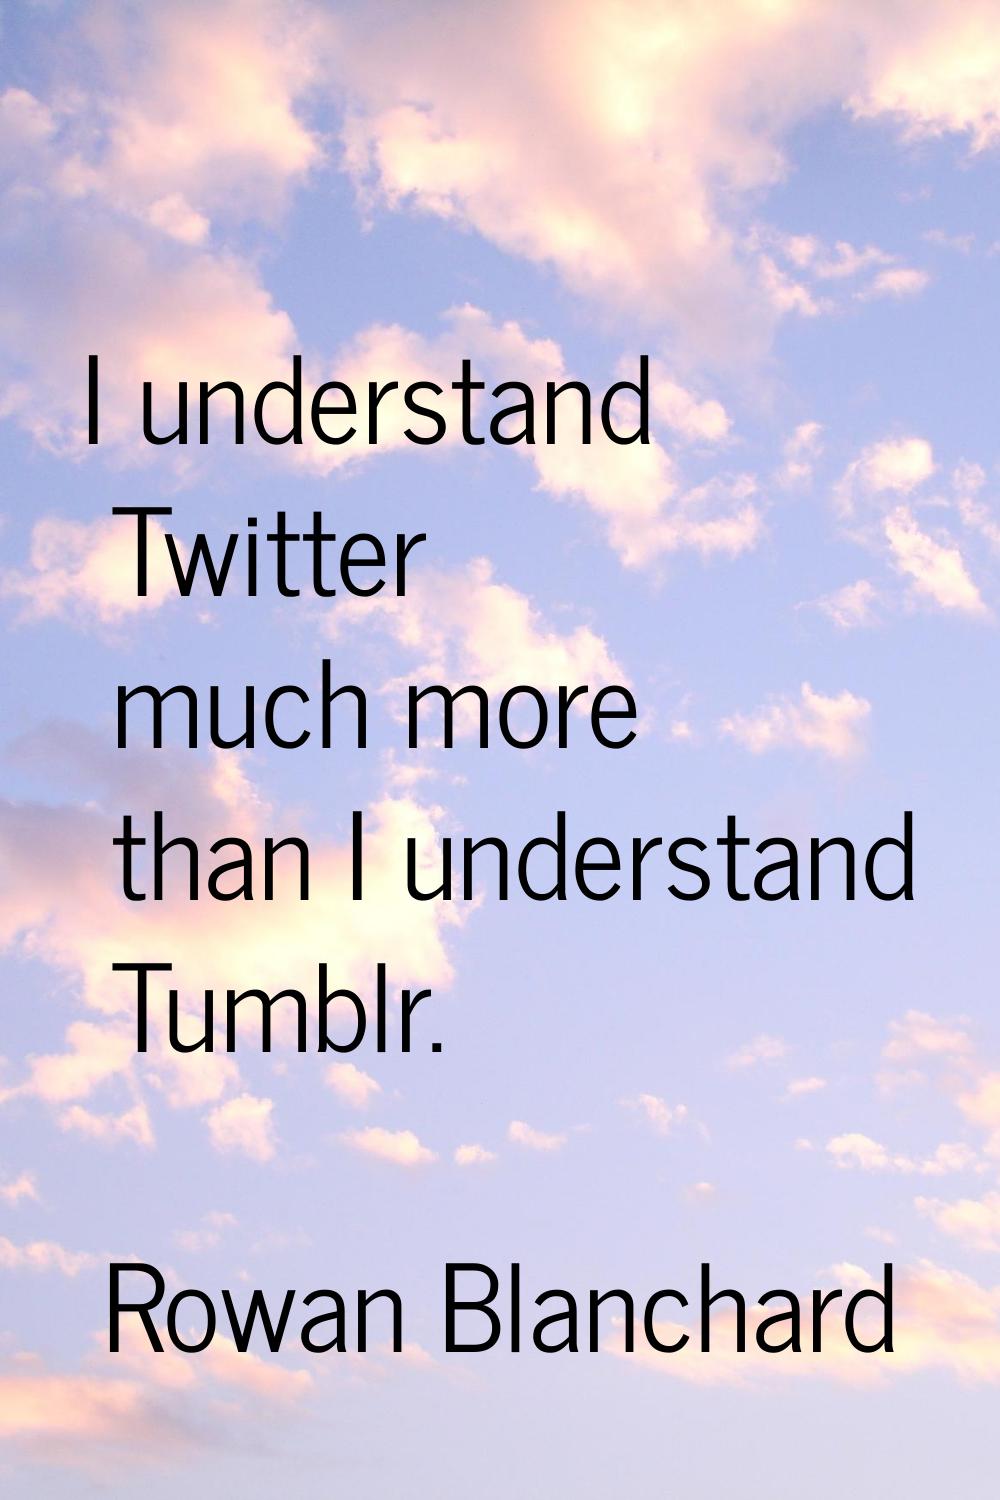 I understand Twitter much more than I understand Tumblr.